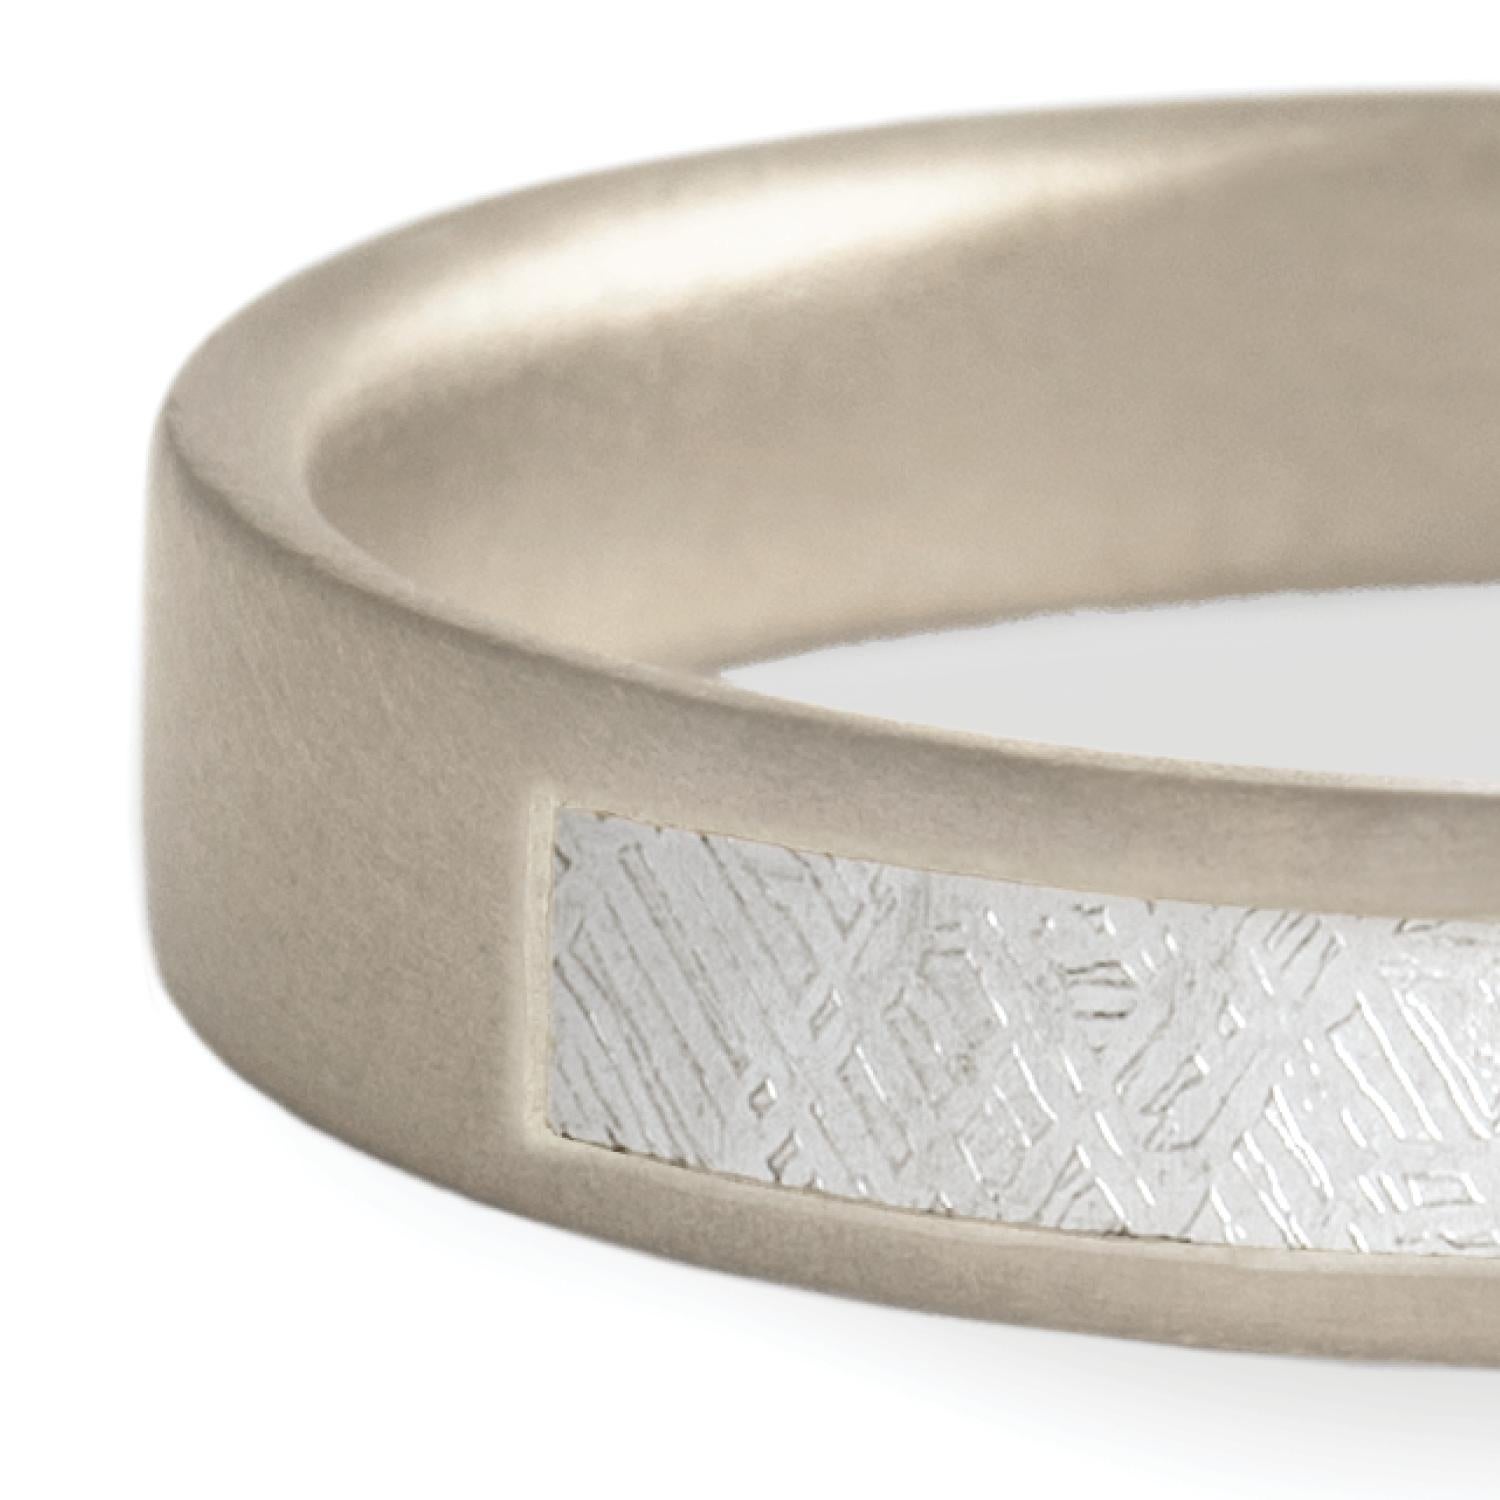 Monique Péan Meteorite Slice Inlay Band, 18 Carat Recycled White Gold In New Condition For Sale In New York, NY